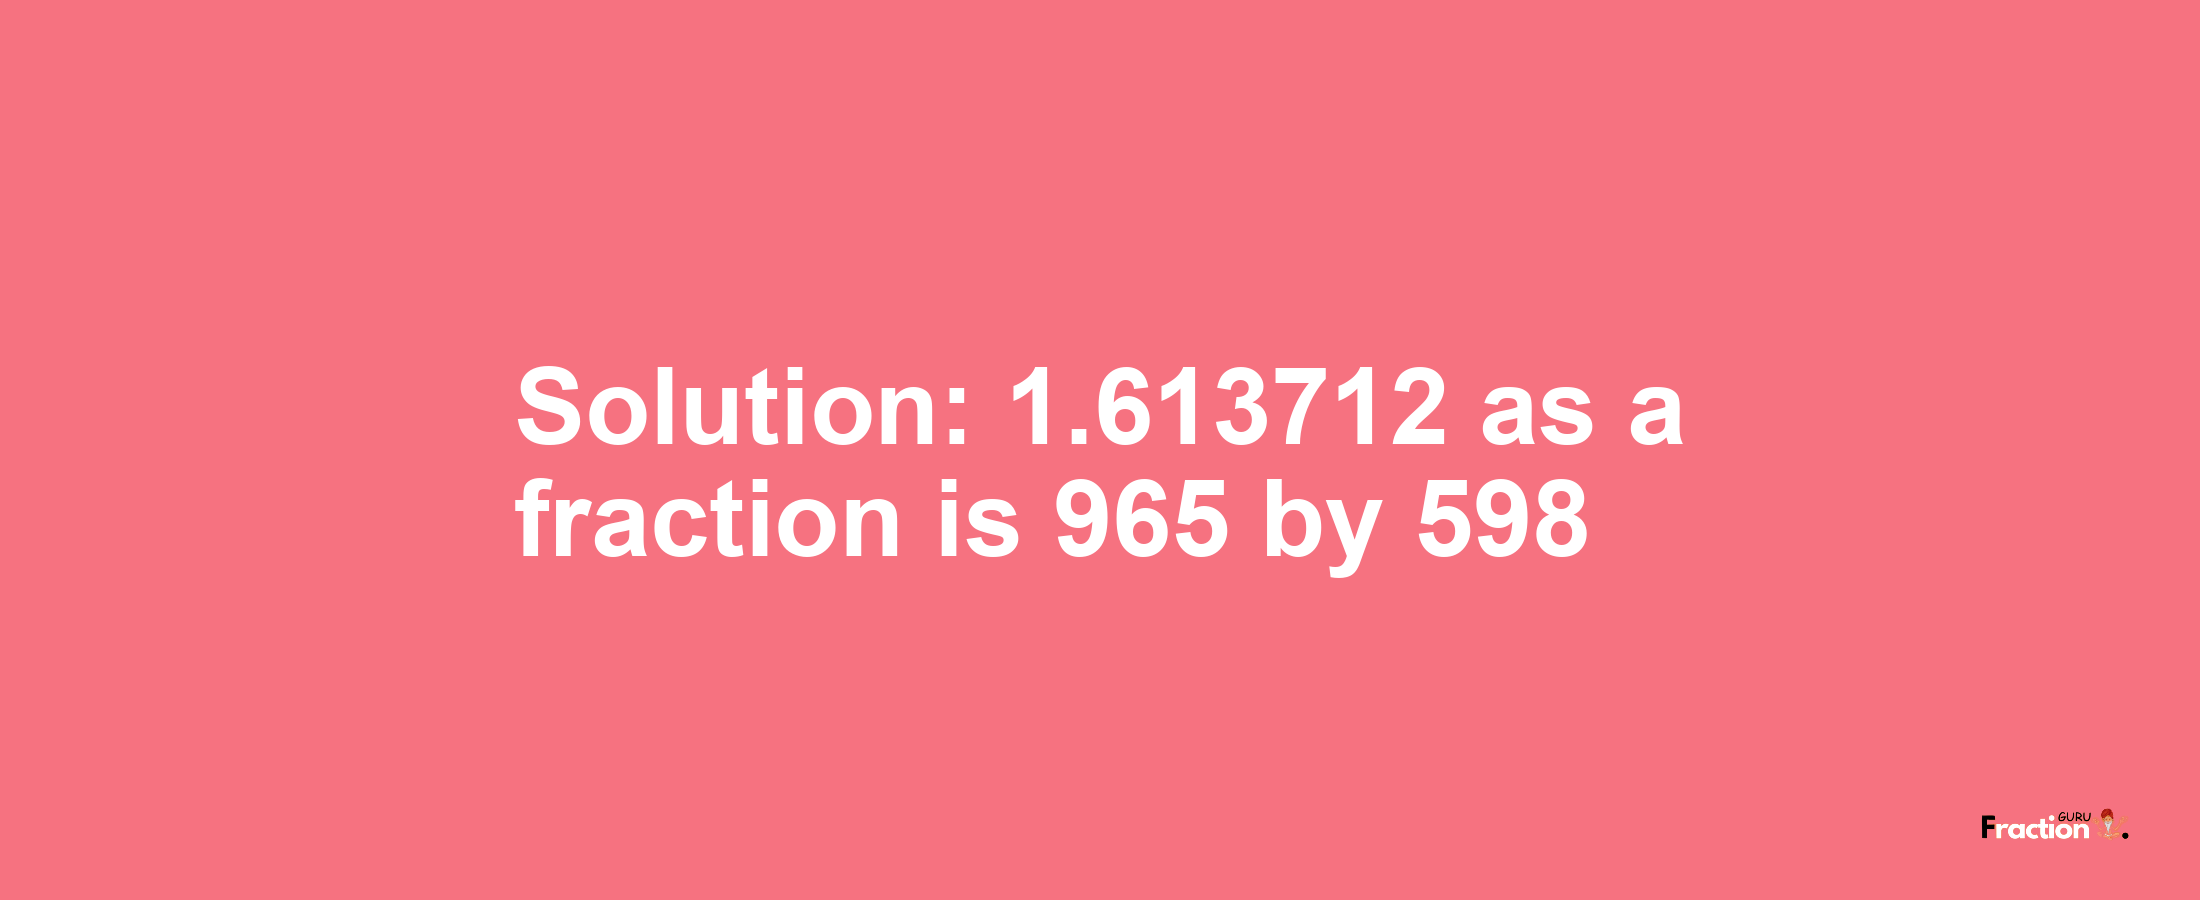 Solution:1.613712 as a fraction is 965/598